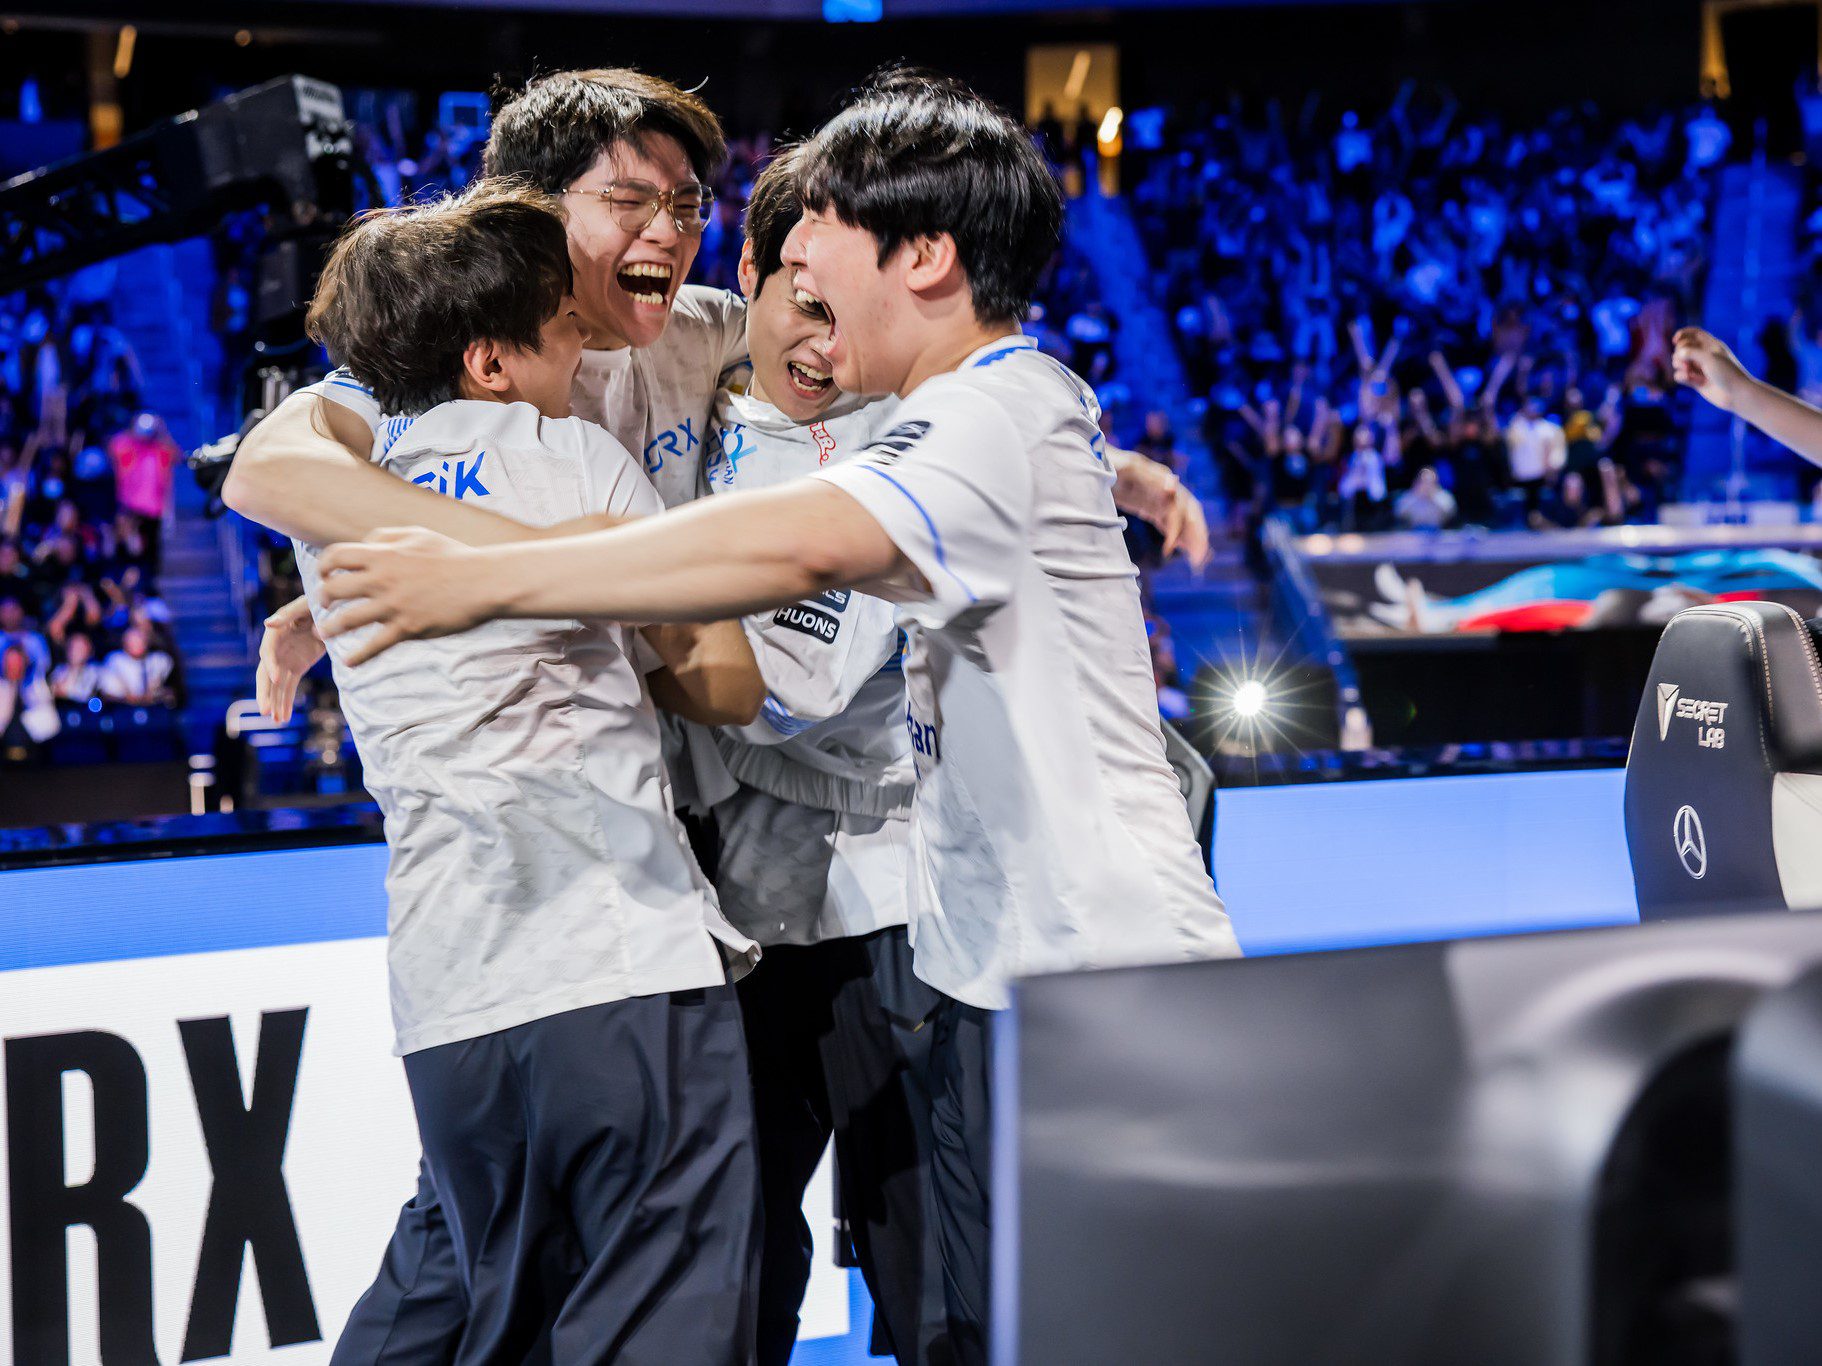 11/10/22: Worlds 2022 shatters viewership record - Cynopsis Media